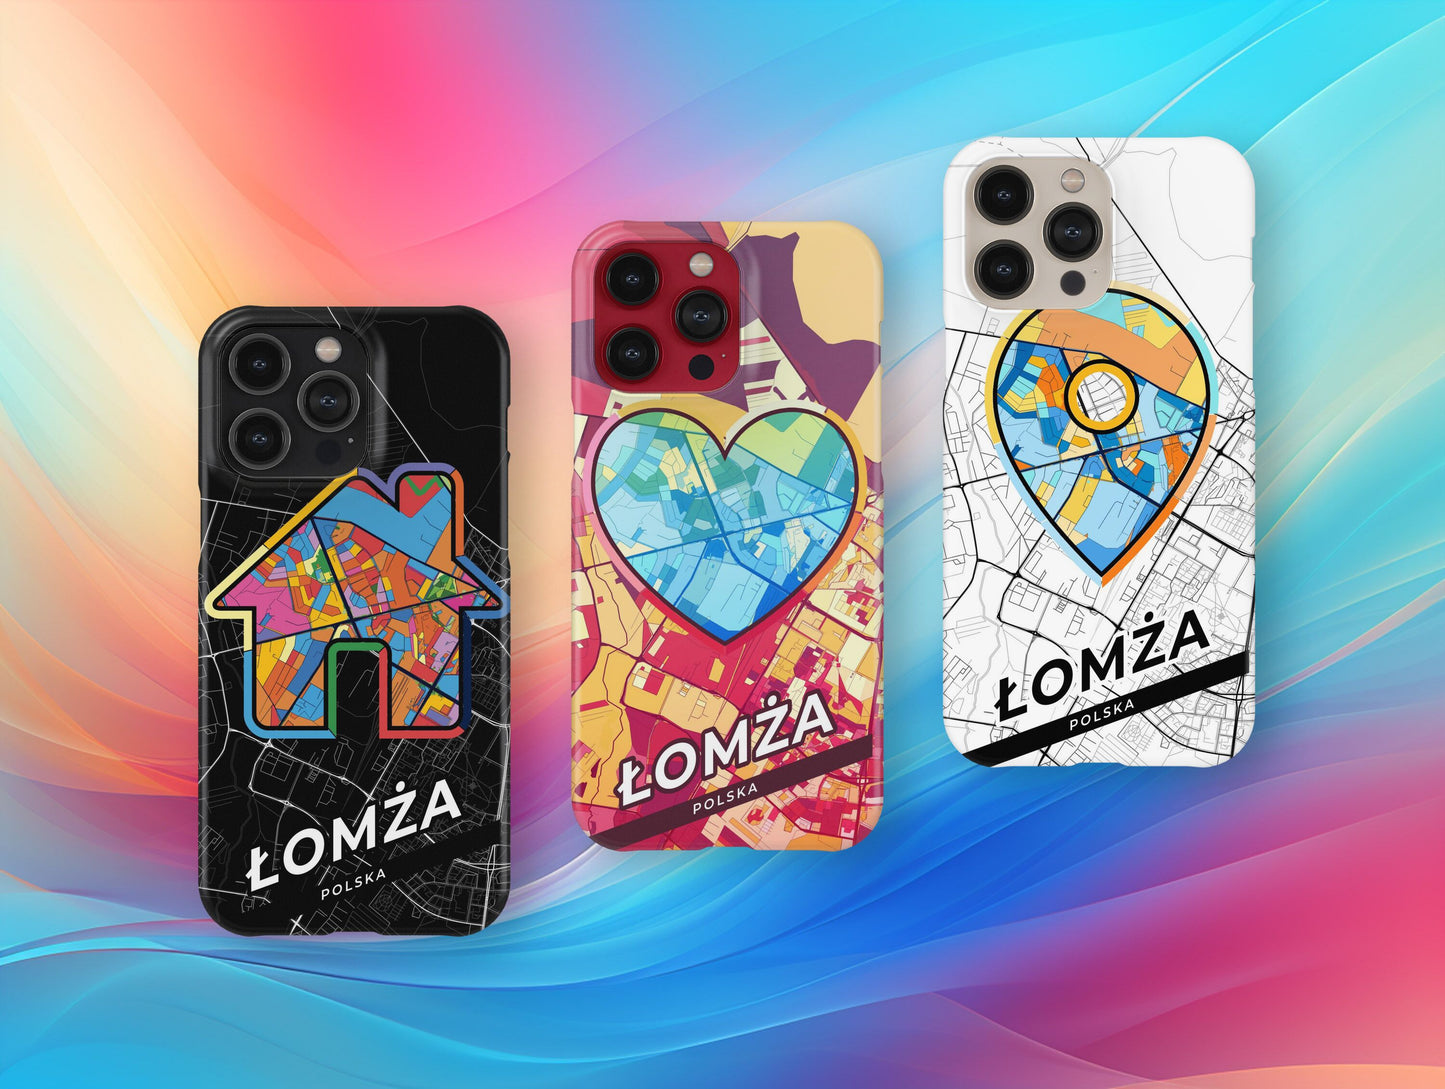 Łomża Poland slim phone case with colorful icon